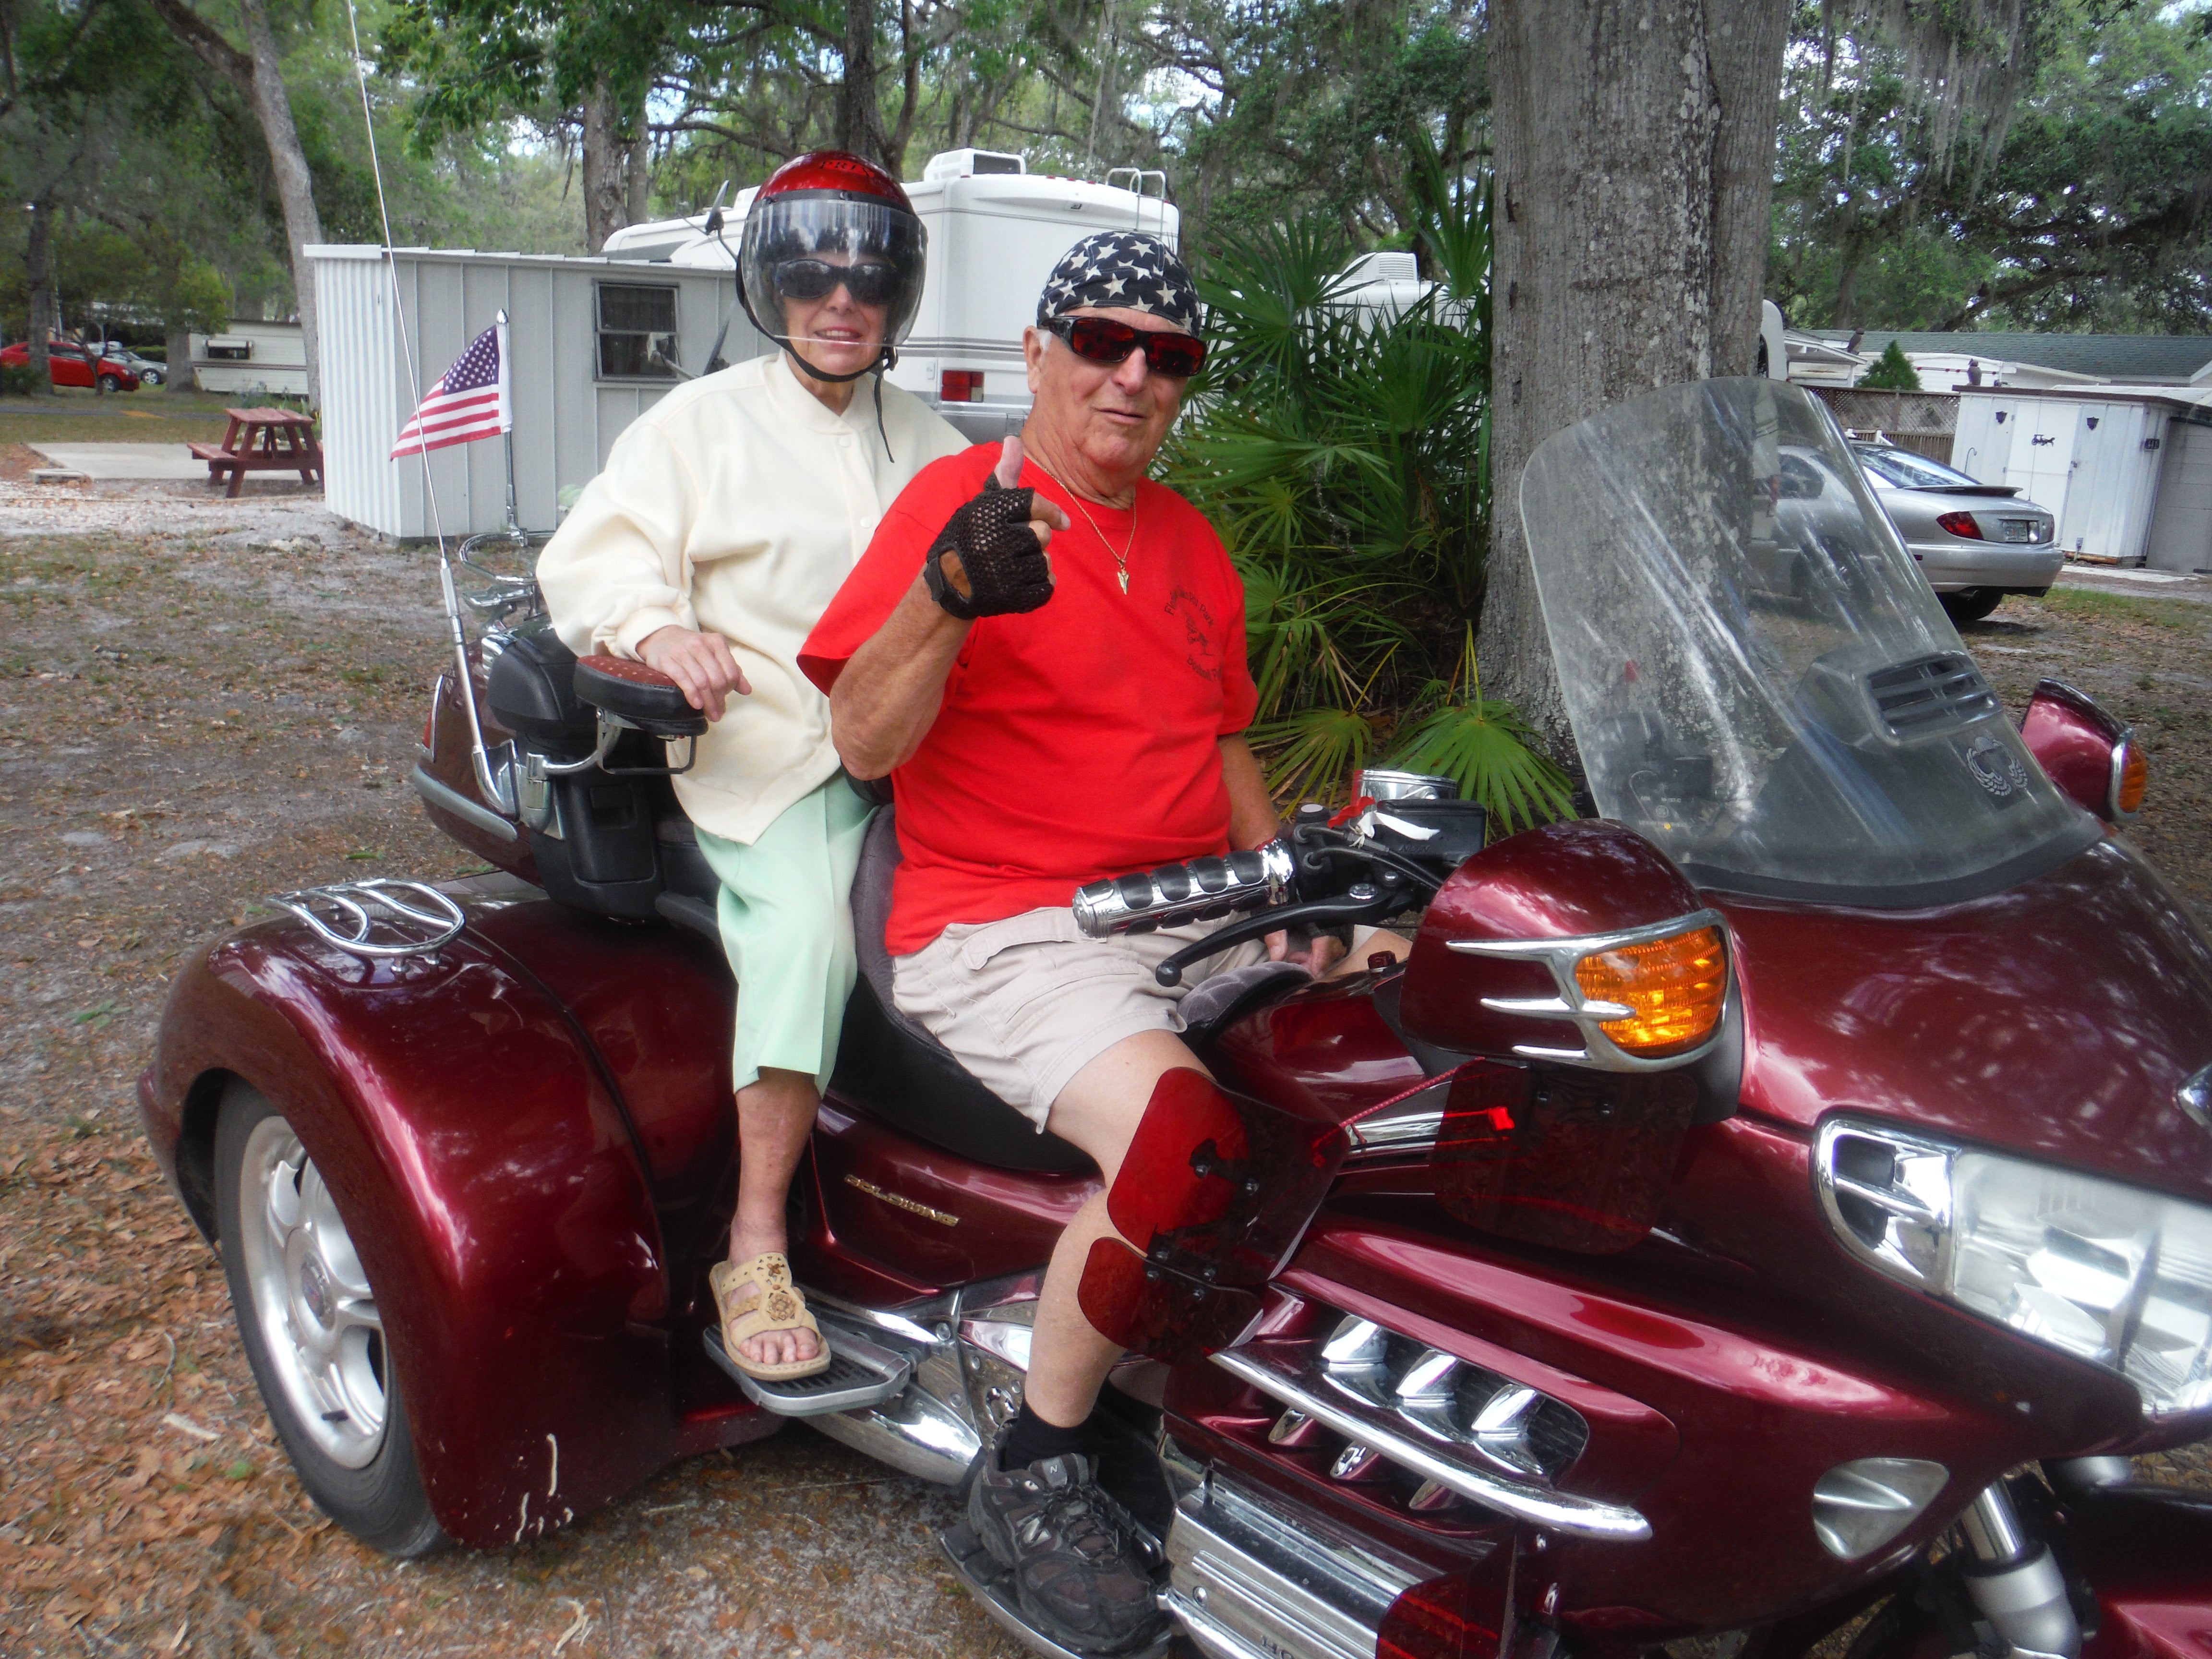 Florida is a great place for motorcycle riding!